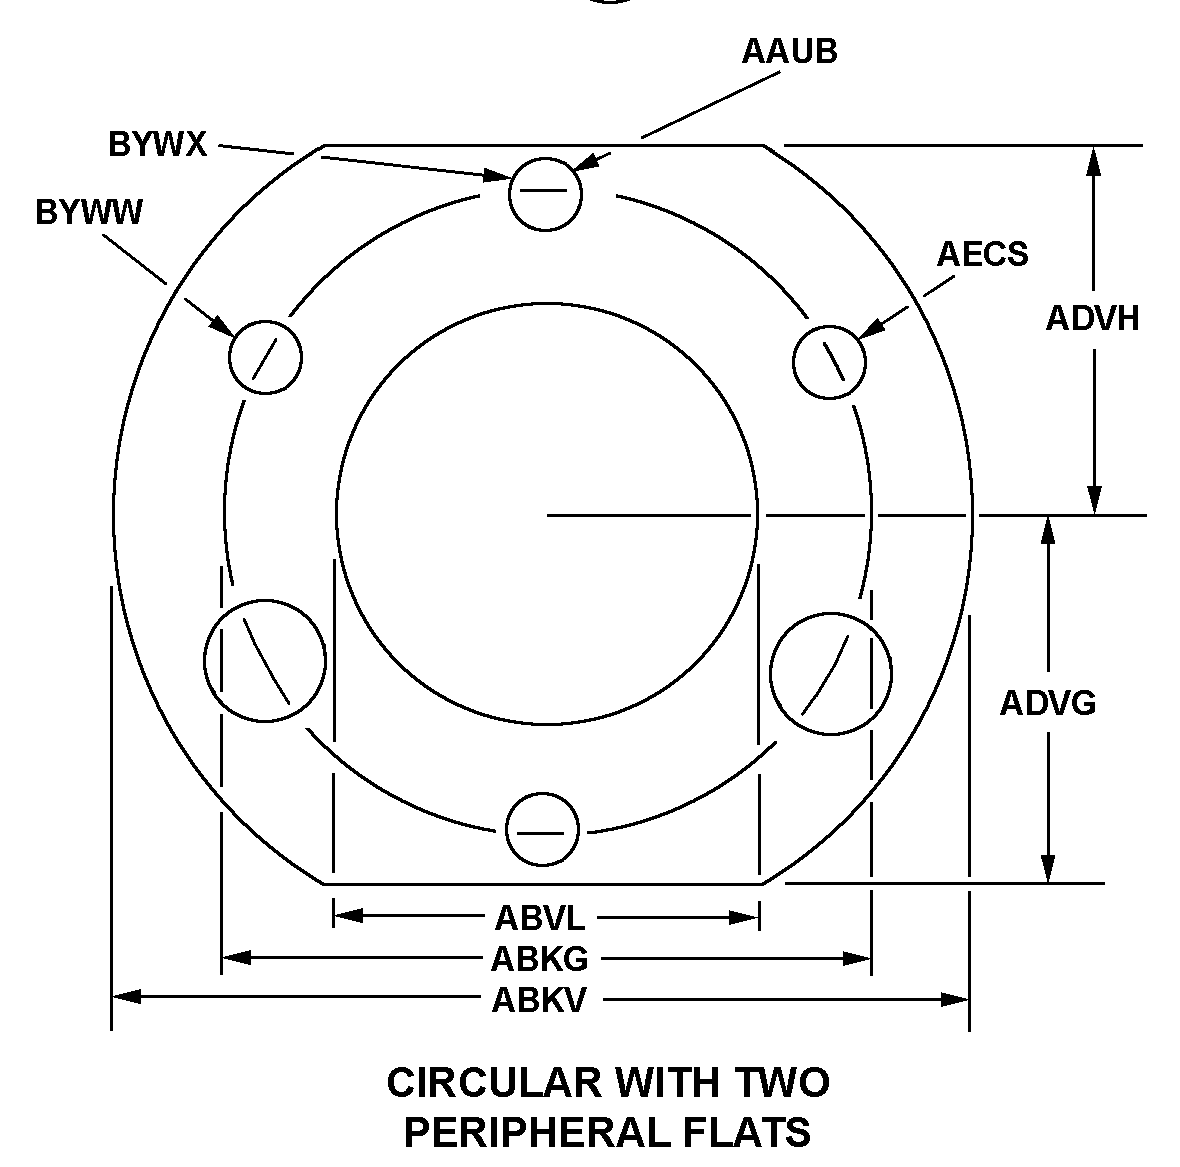 CIRCULAR WITH TWO PERIPHERAL FLATS style nsn 5330-00-254-4517